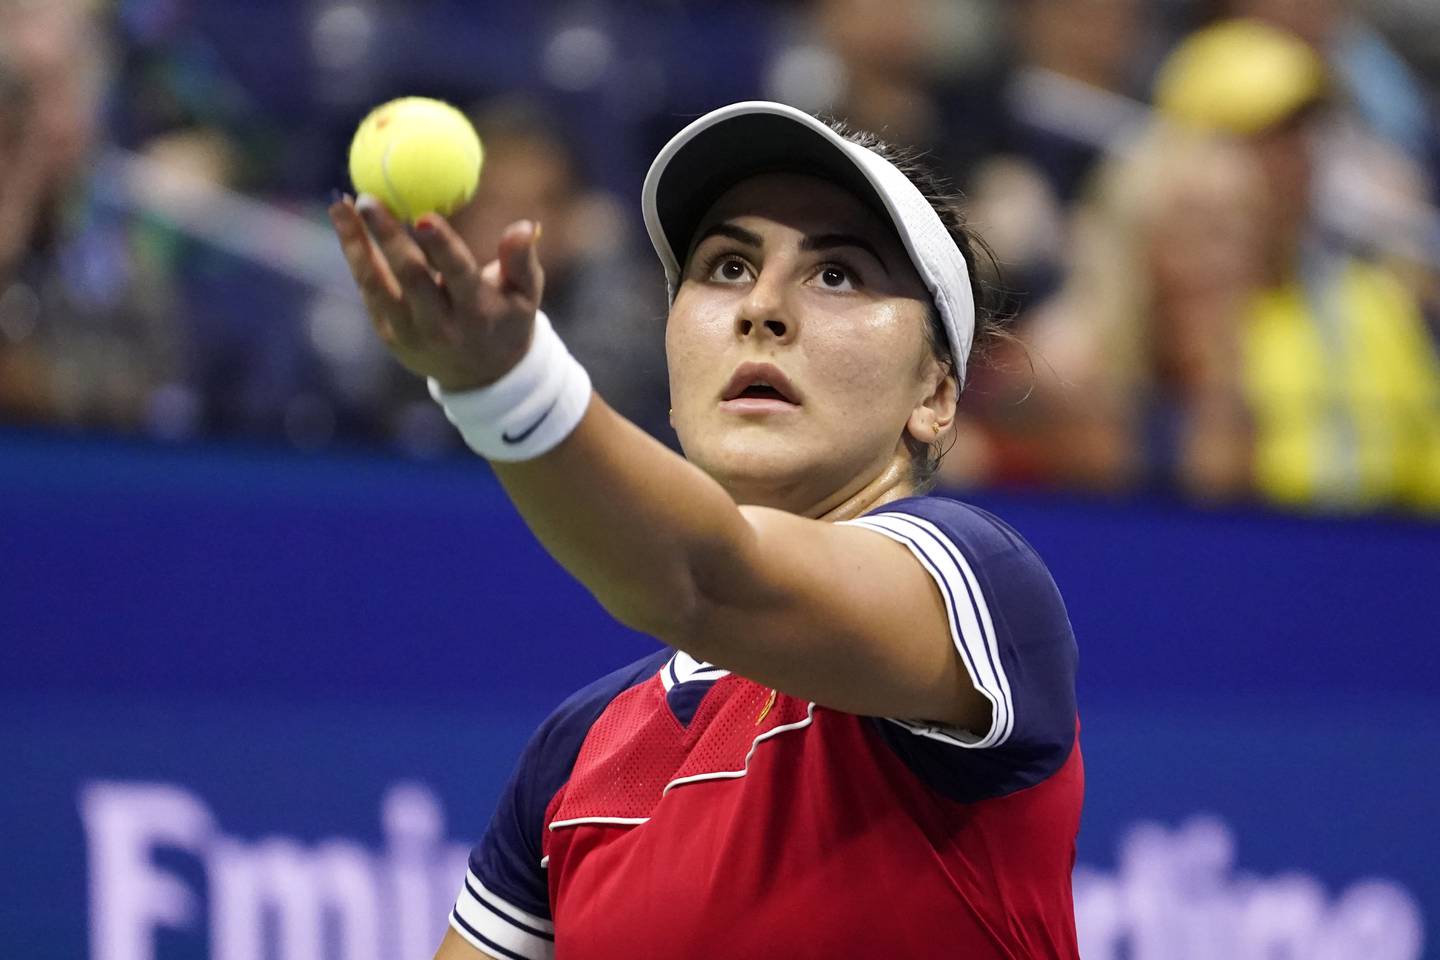 Bianca Andreescu won the 2019 US Open as a 19-year-old. AP